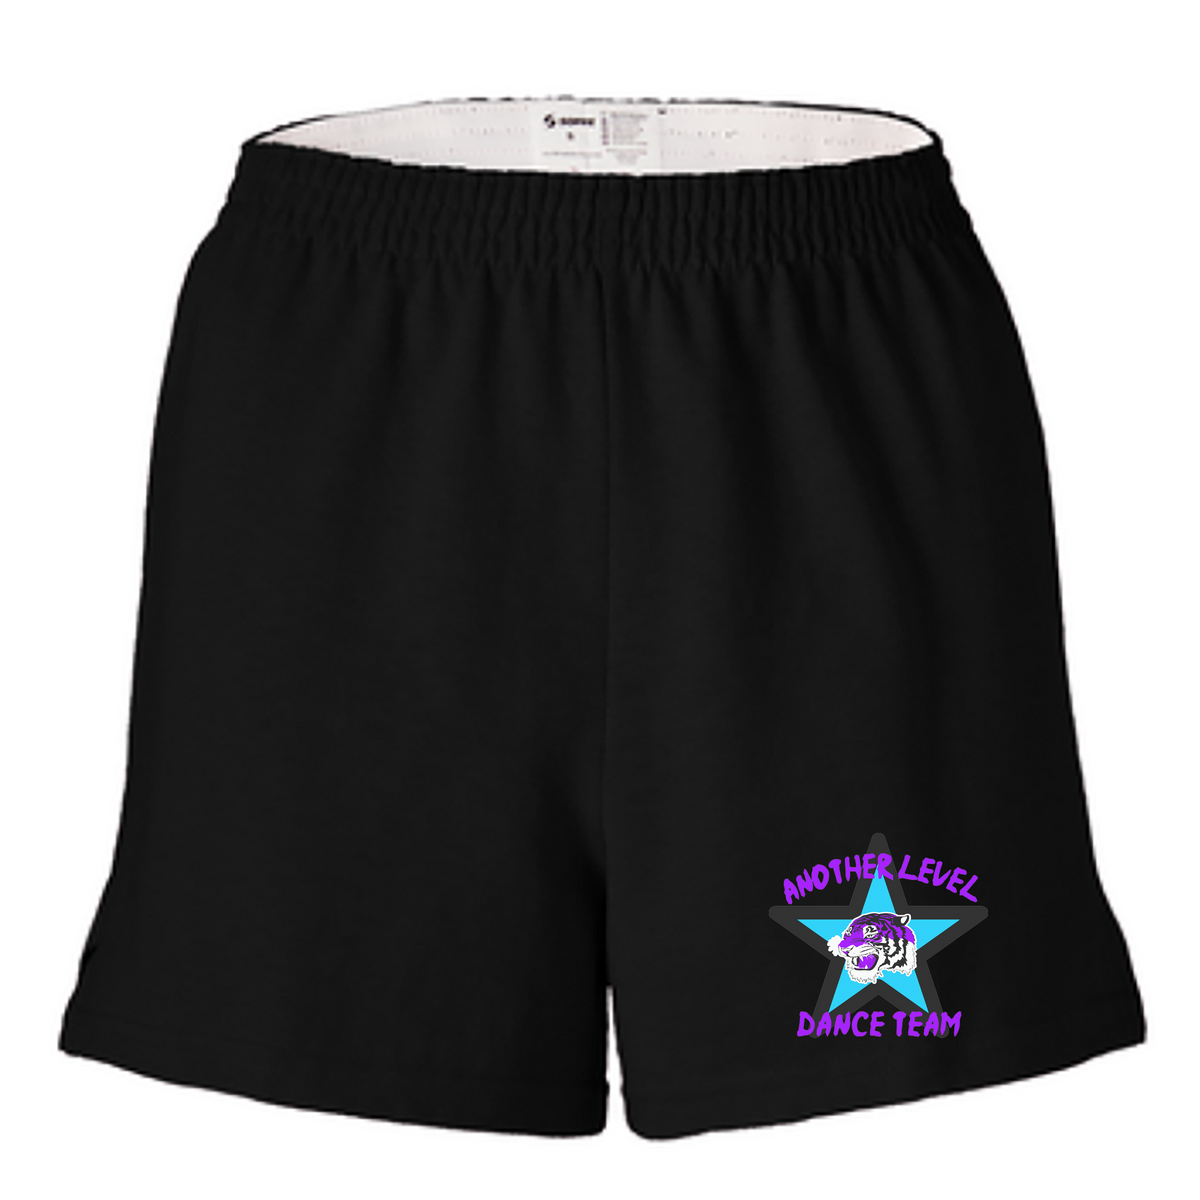 Another Level Dance Team Women's Soffe Shorts